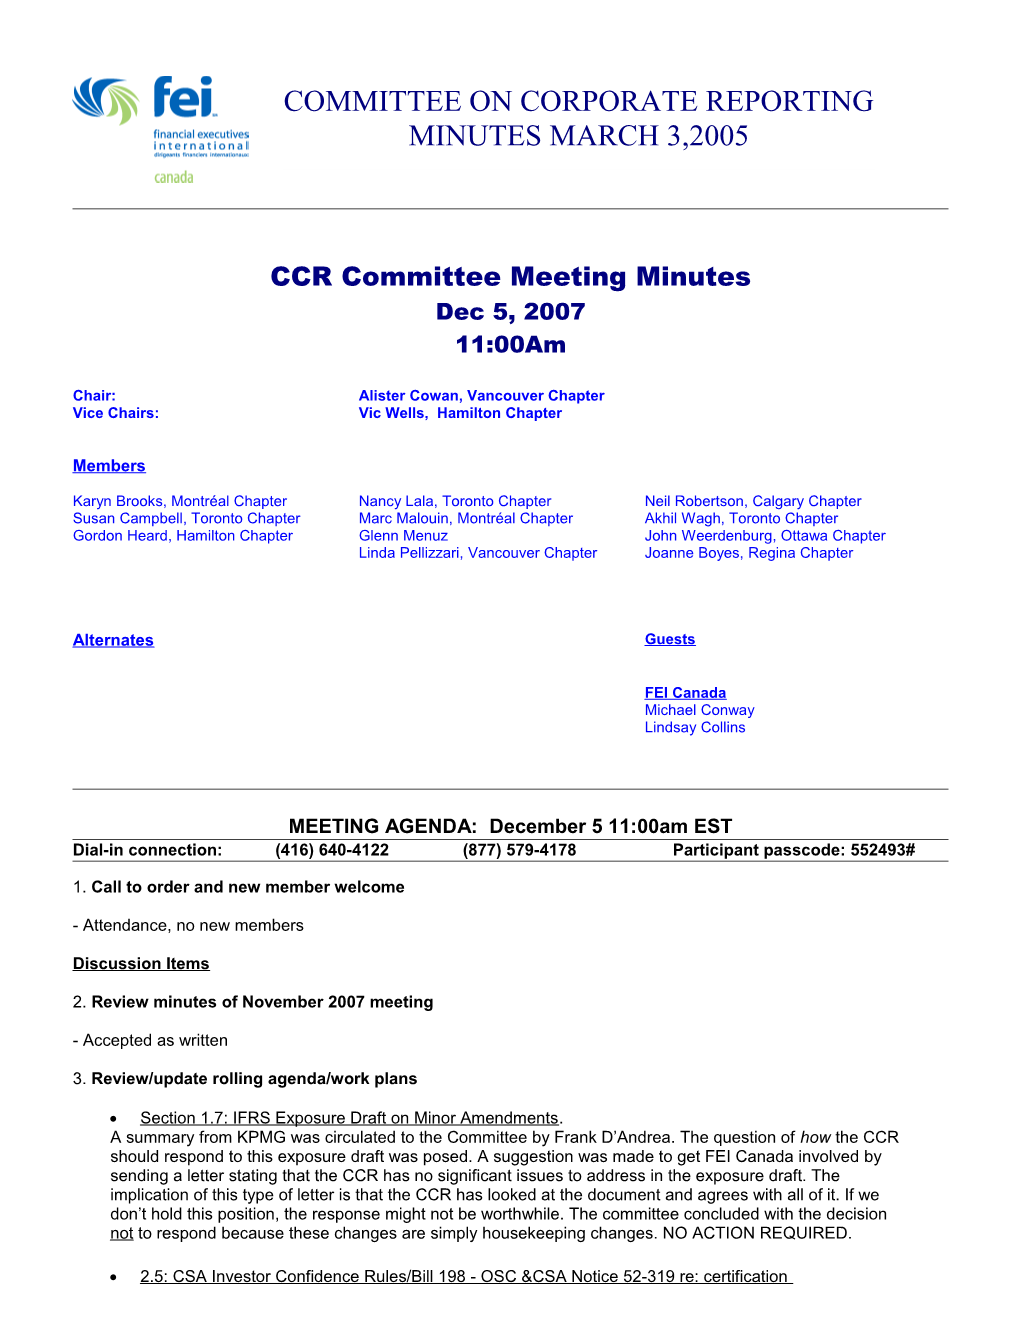 CCR Committee Meeting Minutes